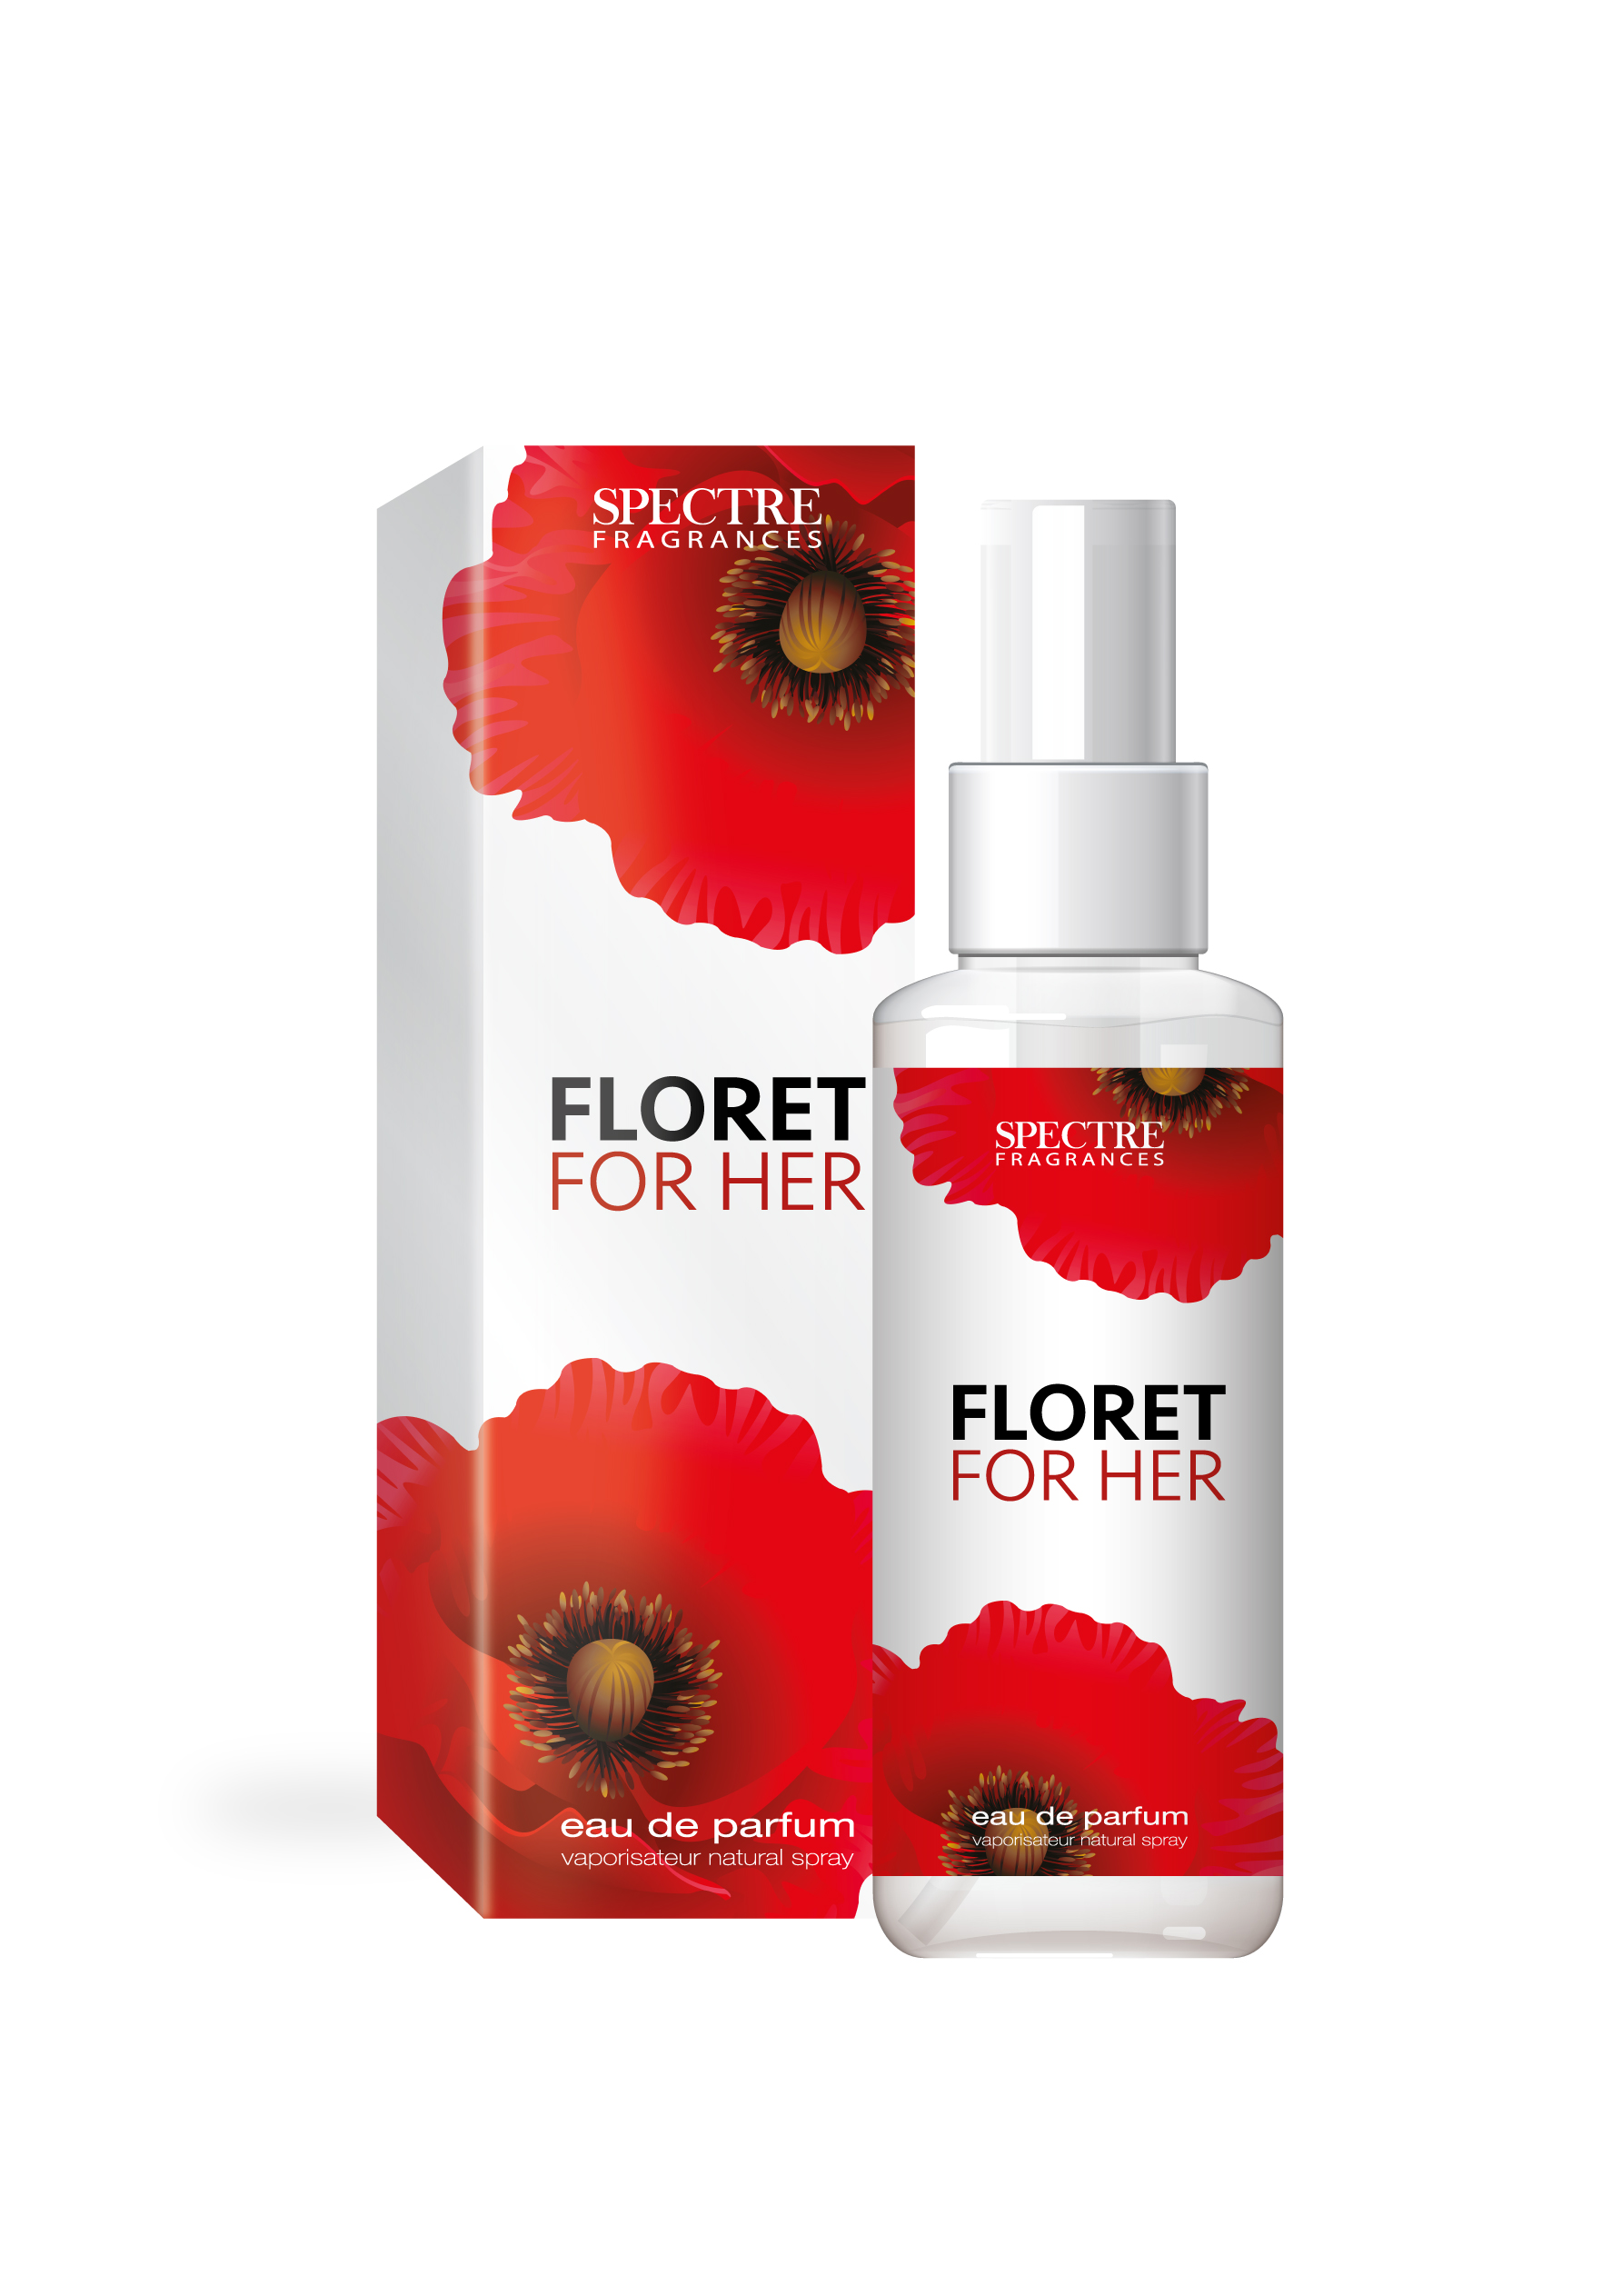 Featured image for “Floret”